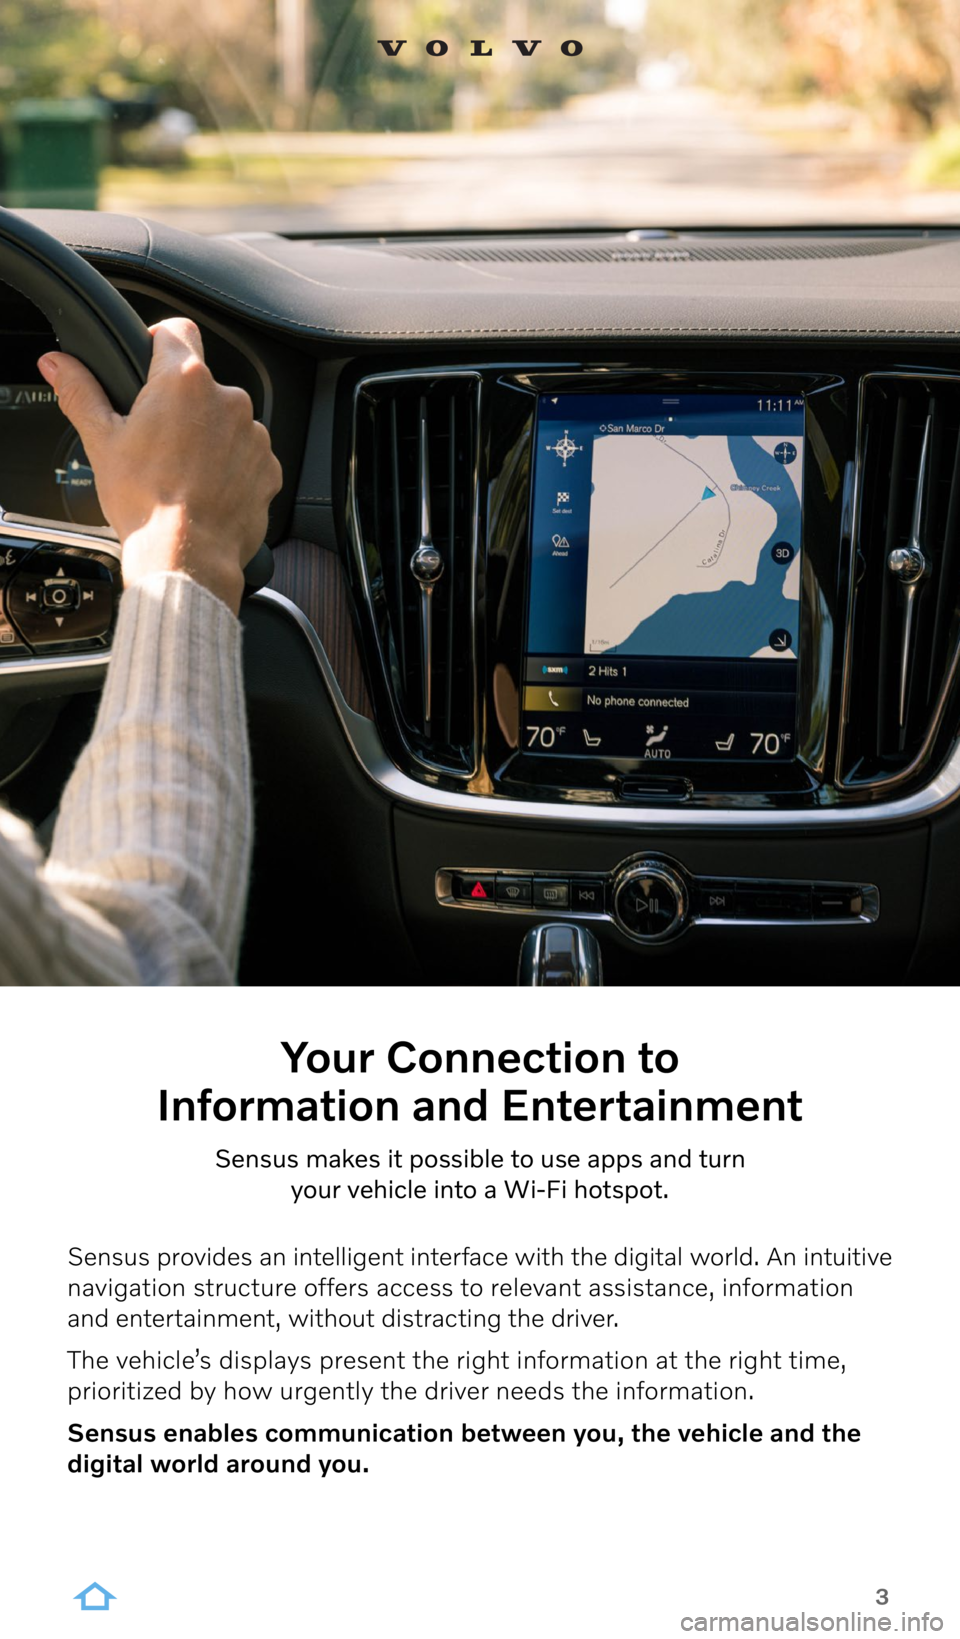 VOLVO V60 CROSS COUNTRY 2022  Sensus Digital Guide 3
Your Connection to  
Information and Entertainment
Sensus makes it possible to use apps and turn  
your vehicle into a Wi-Fi hotspot.
Sensus provides an intelligent interface with the digital world.